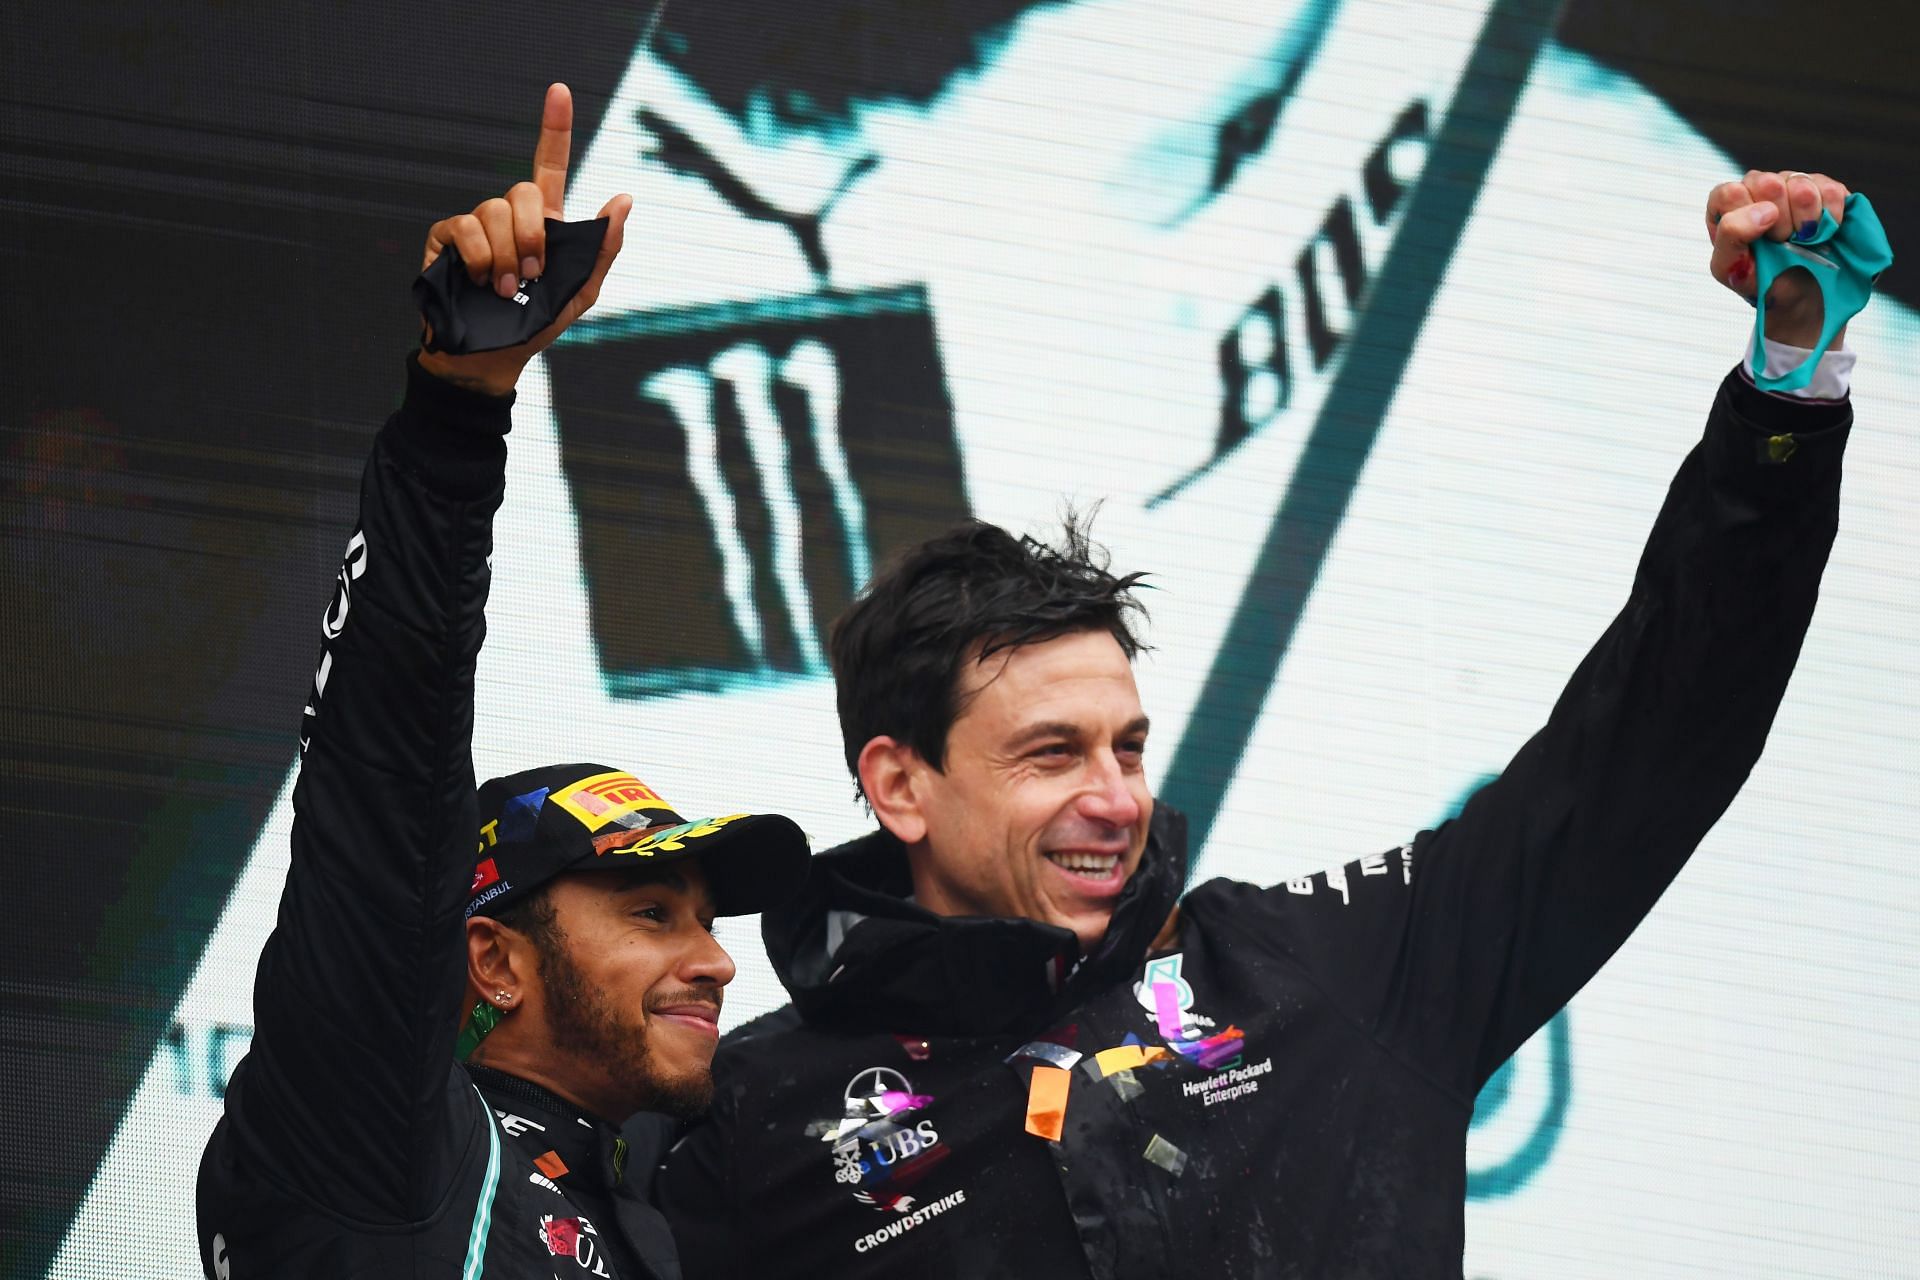 Lewis Hamilton and Toto Wolff at the F1 Grand Prix of Turkey